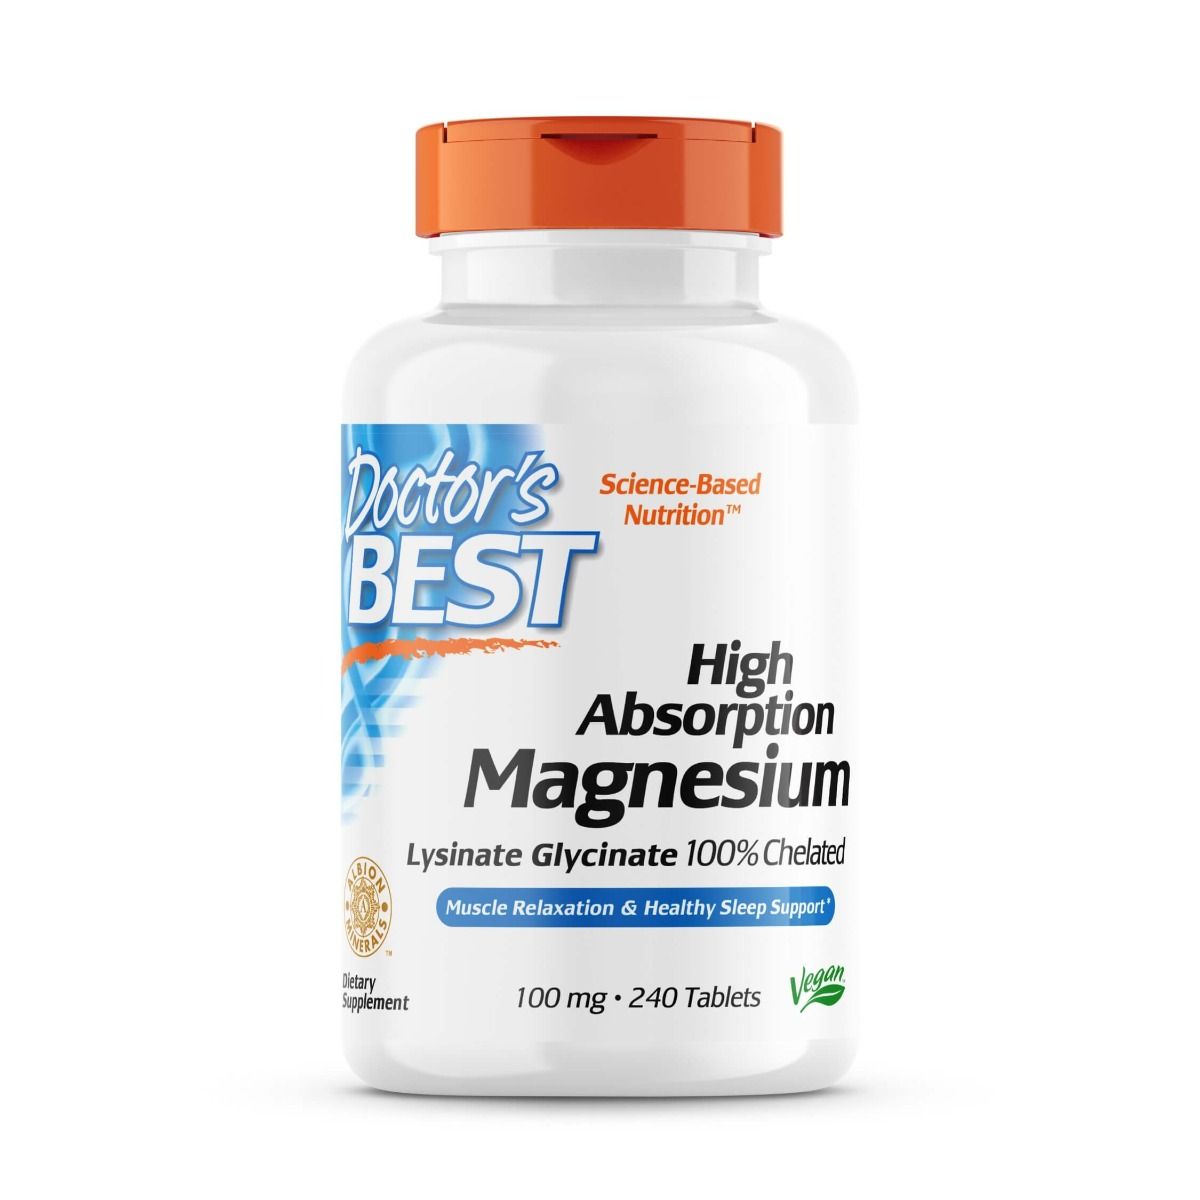 Photos - Vitamins & Minerals Doctors Best Doctor's Best High Absorption Magnesium 100 mg 240 Tablets PBW-P30671 